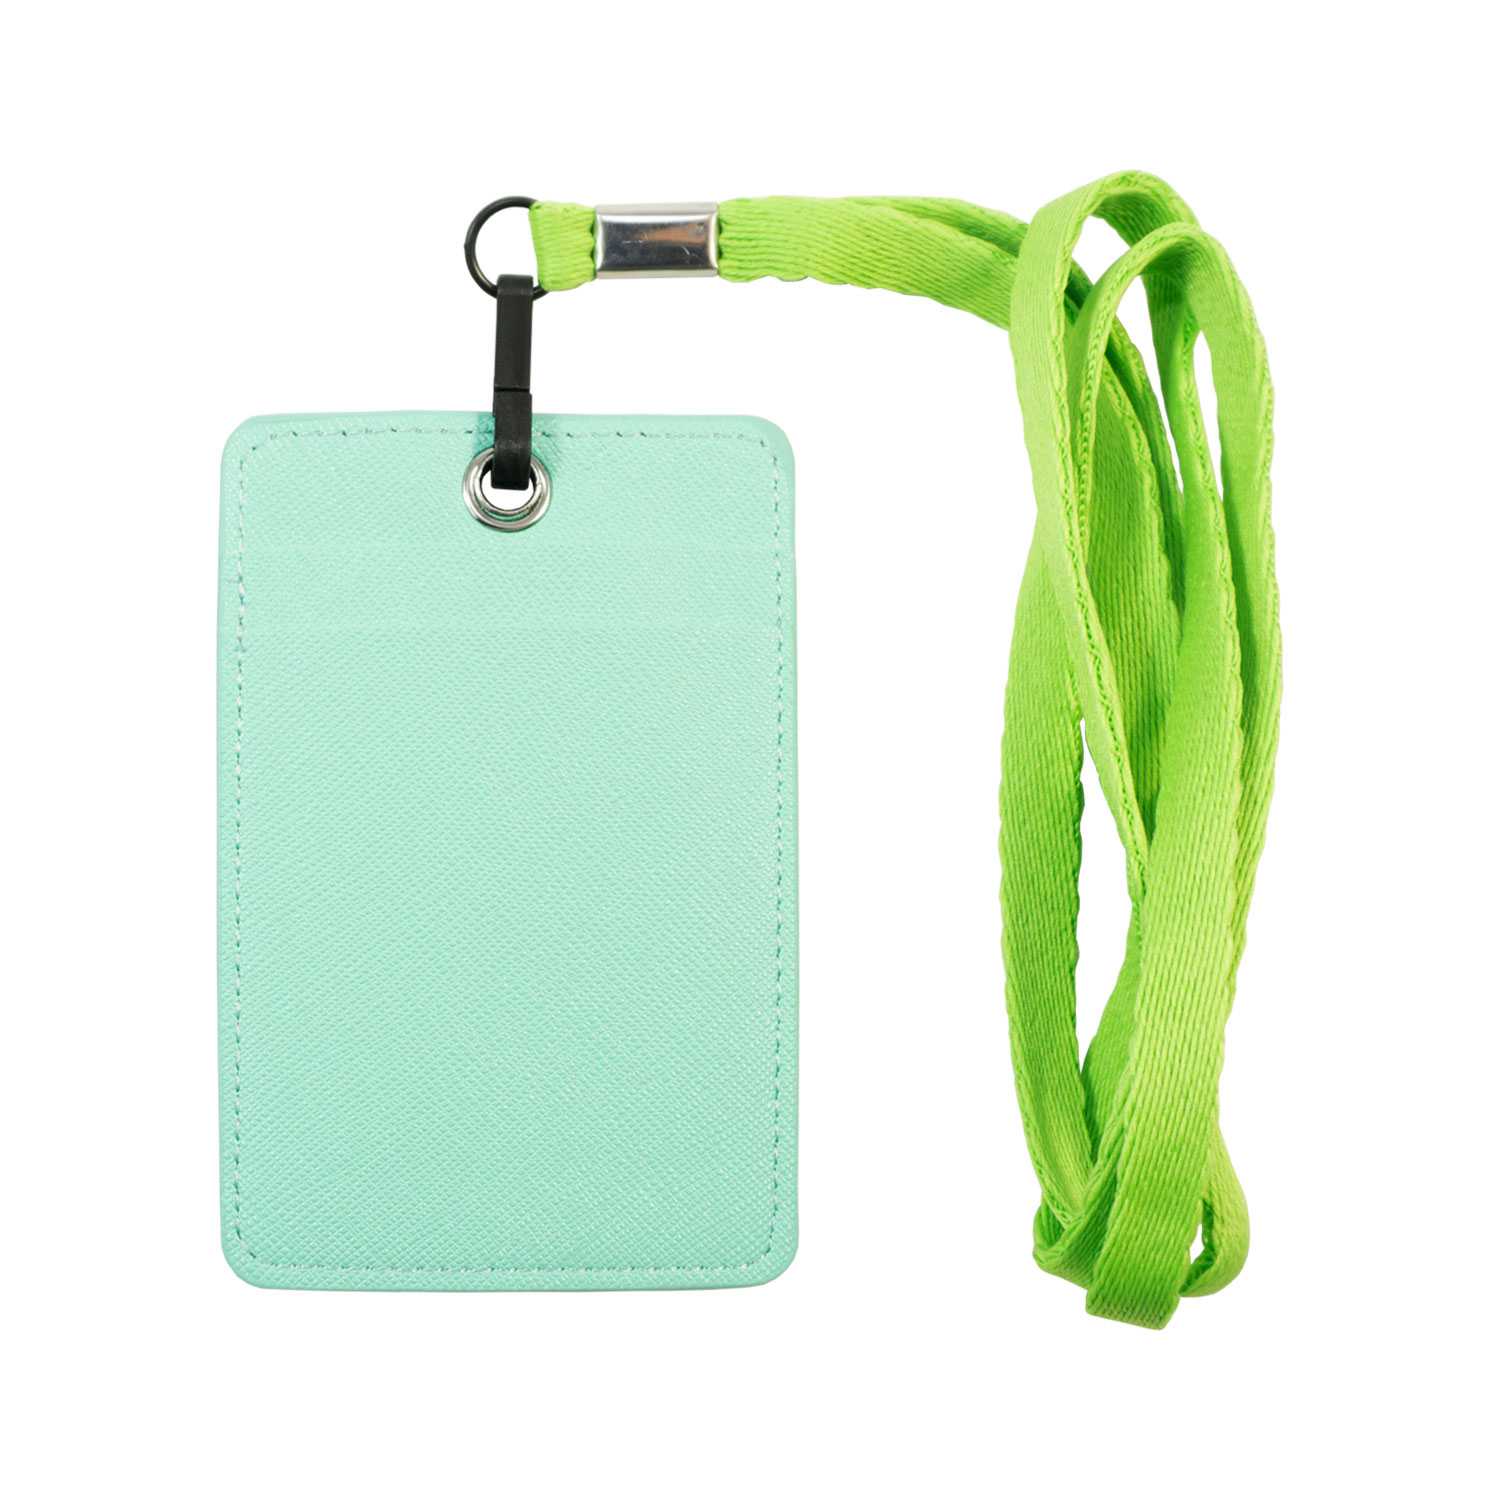 Unisex ID & Credit Cards Holder Wallet with Lanyard - Mint - Zestique